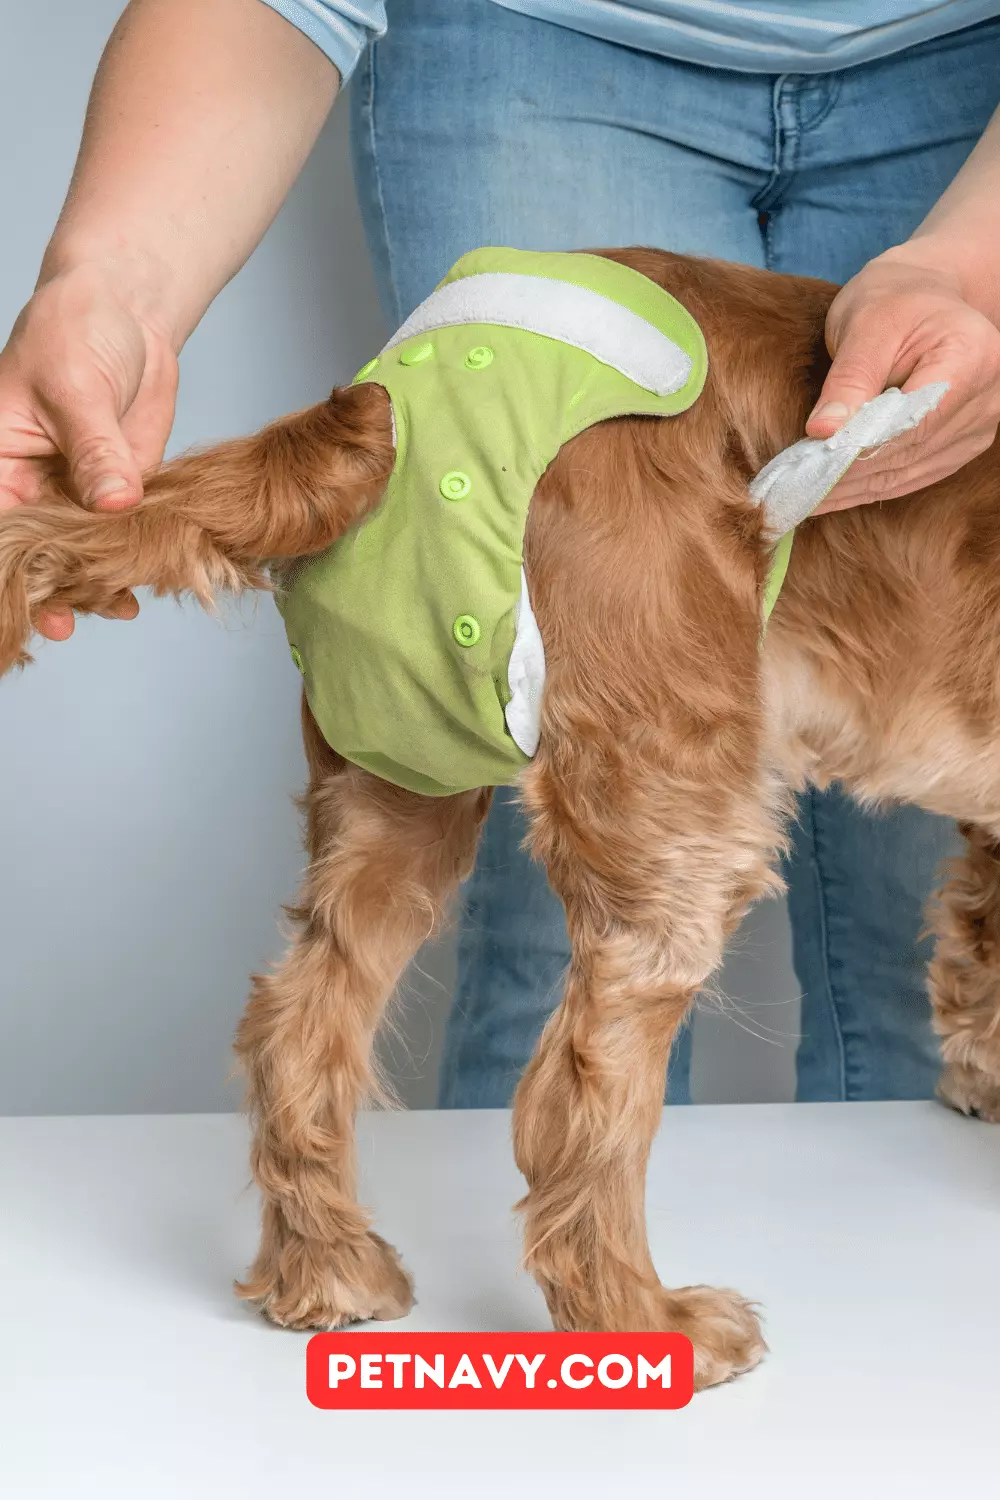 DIY 5 Simple Free Patterns for Male Dog Diapers